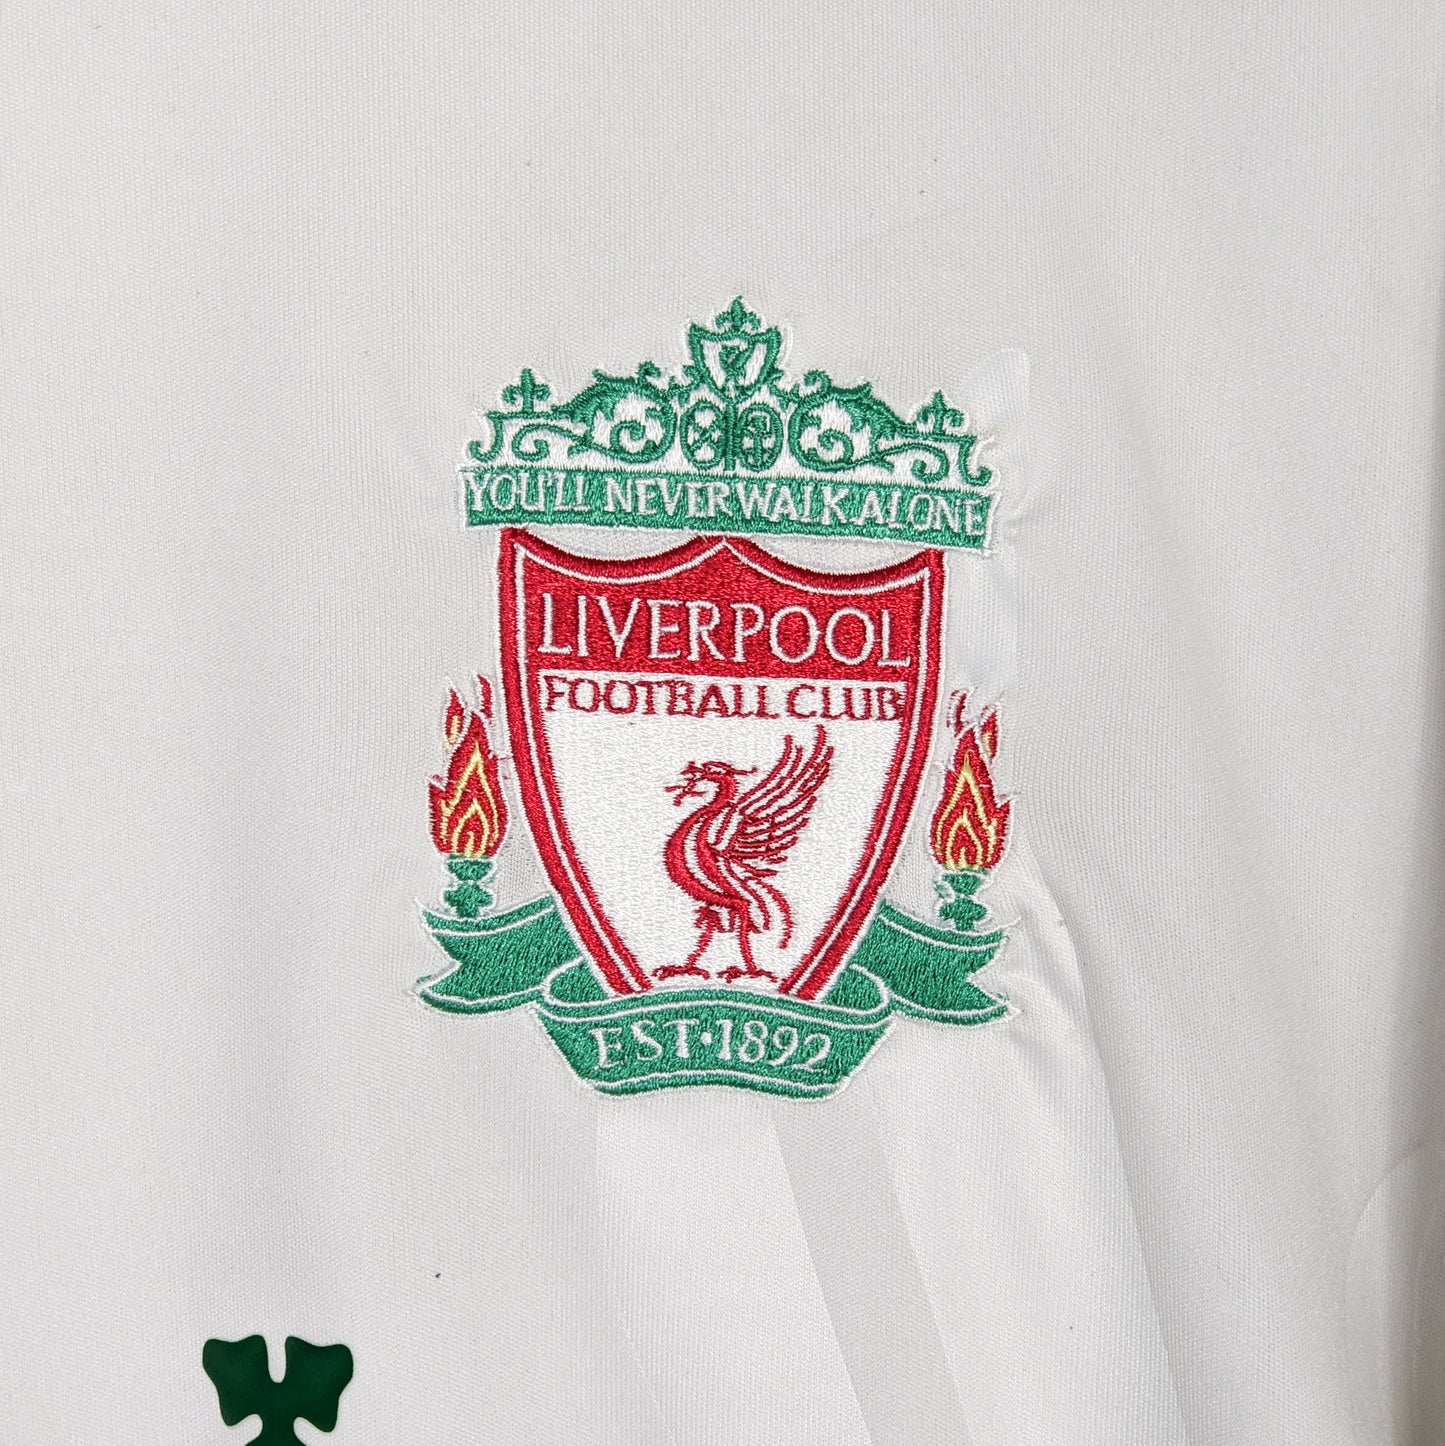 Authentic Liverpool 2009/2010 Away - Carragher #23 Size L